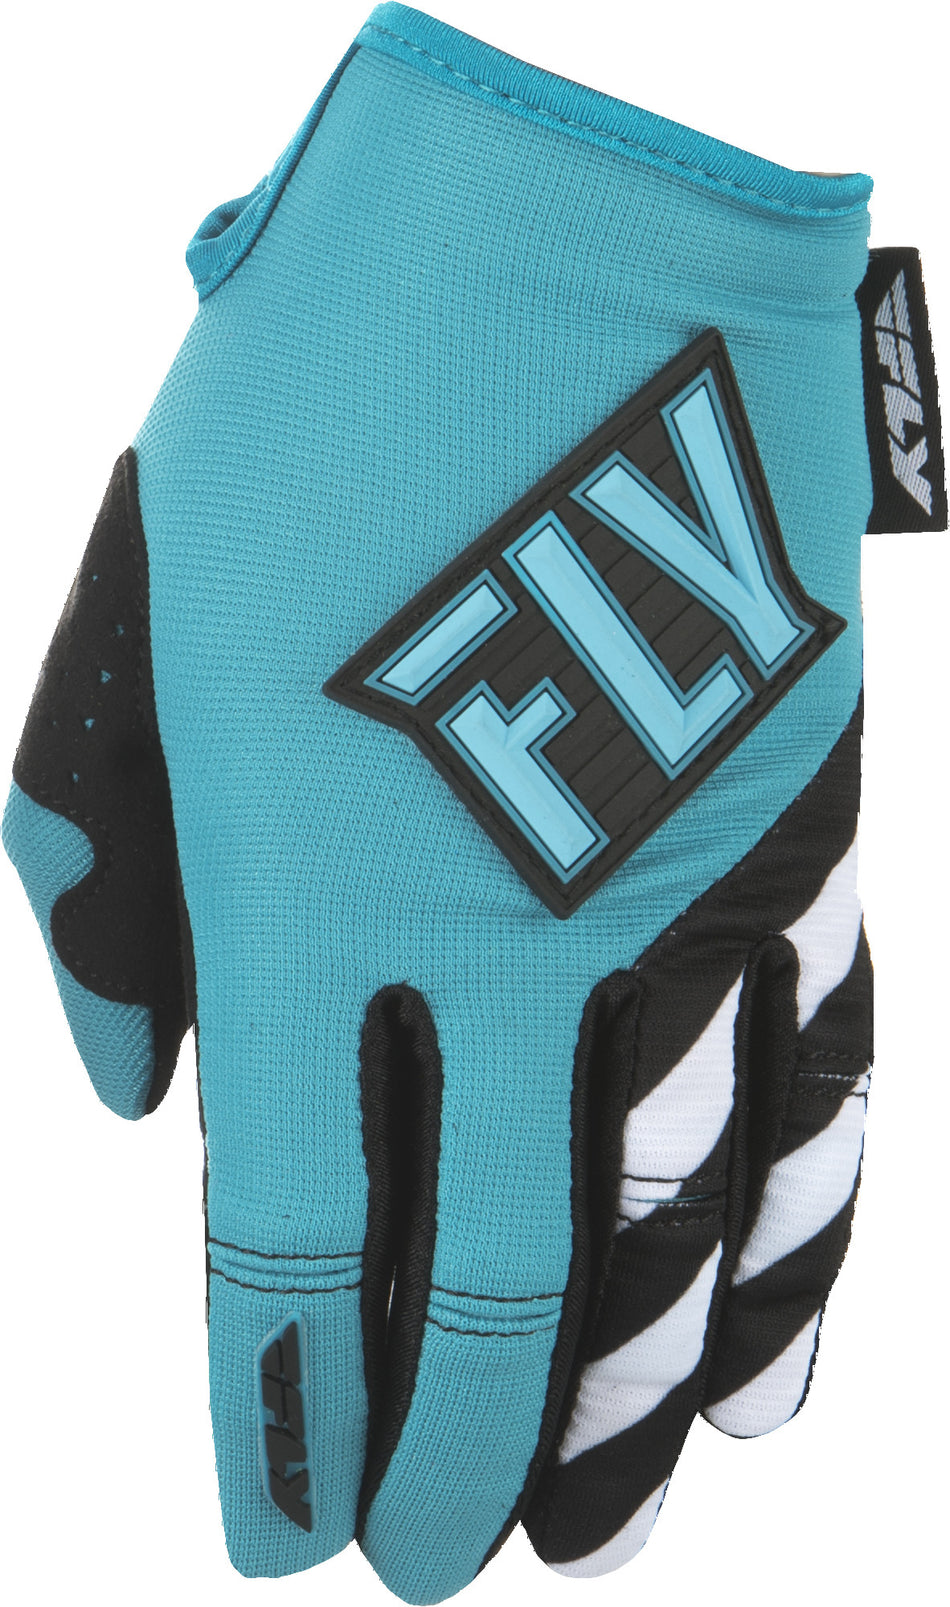 FLY RACING Kinetic Women's Gloves Blue/Teal X 371-61109